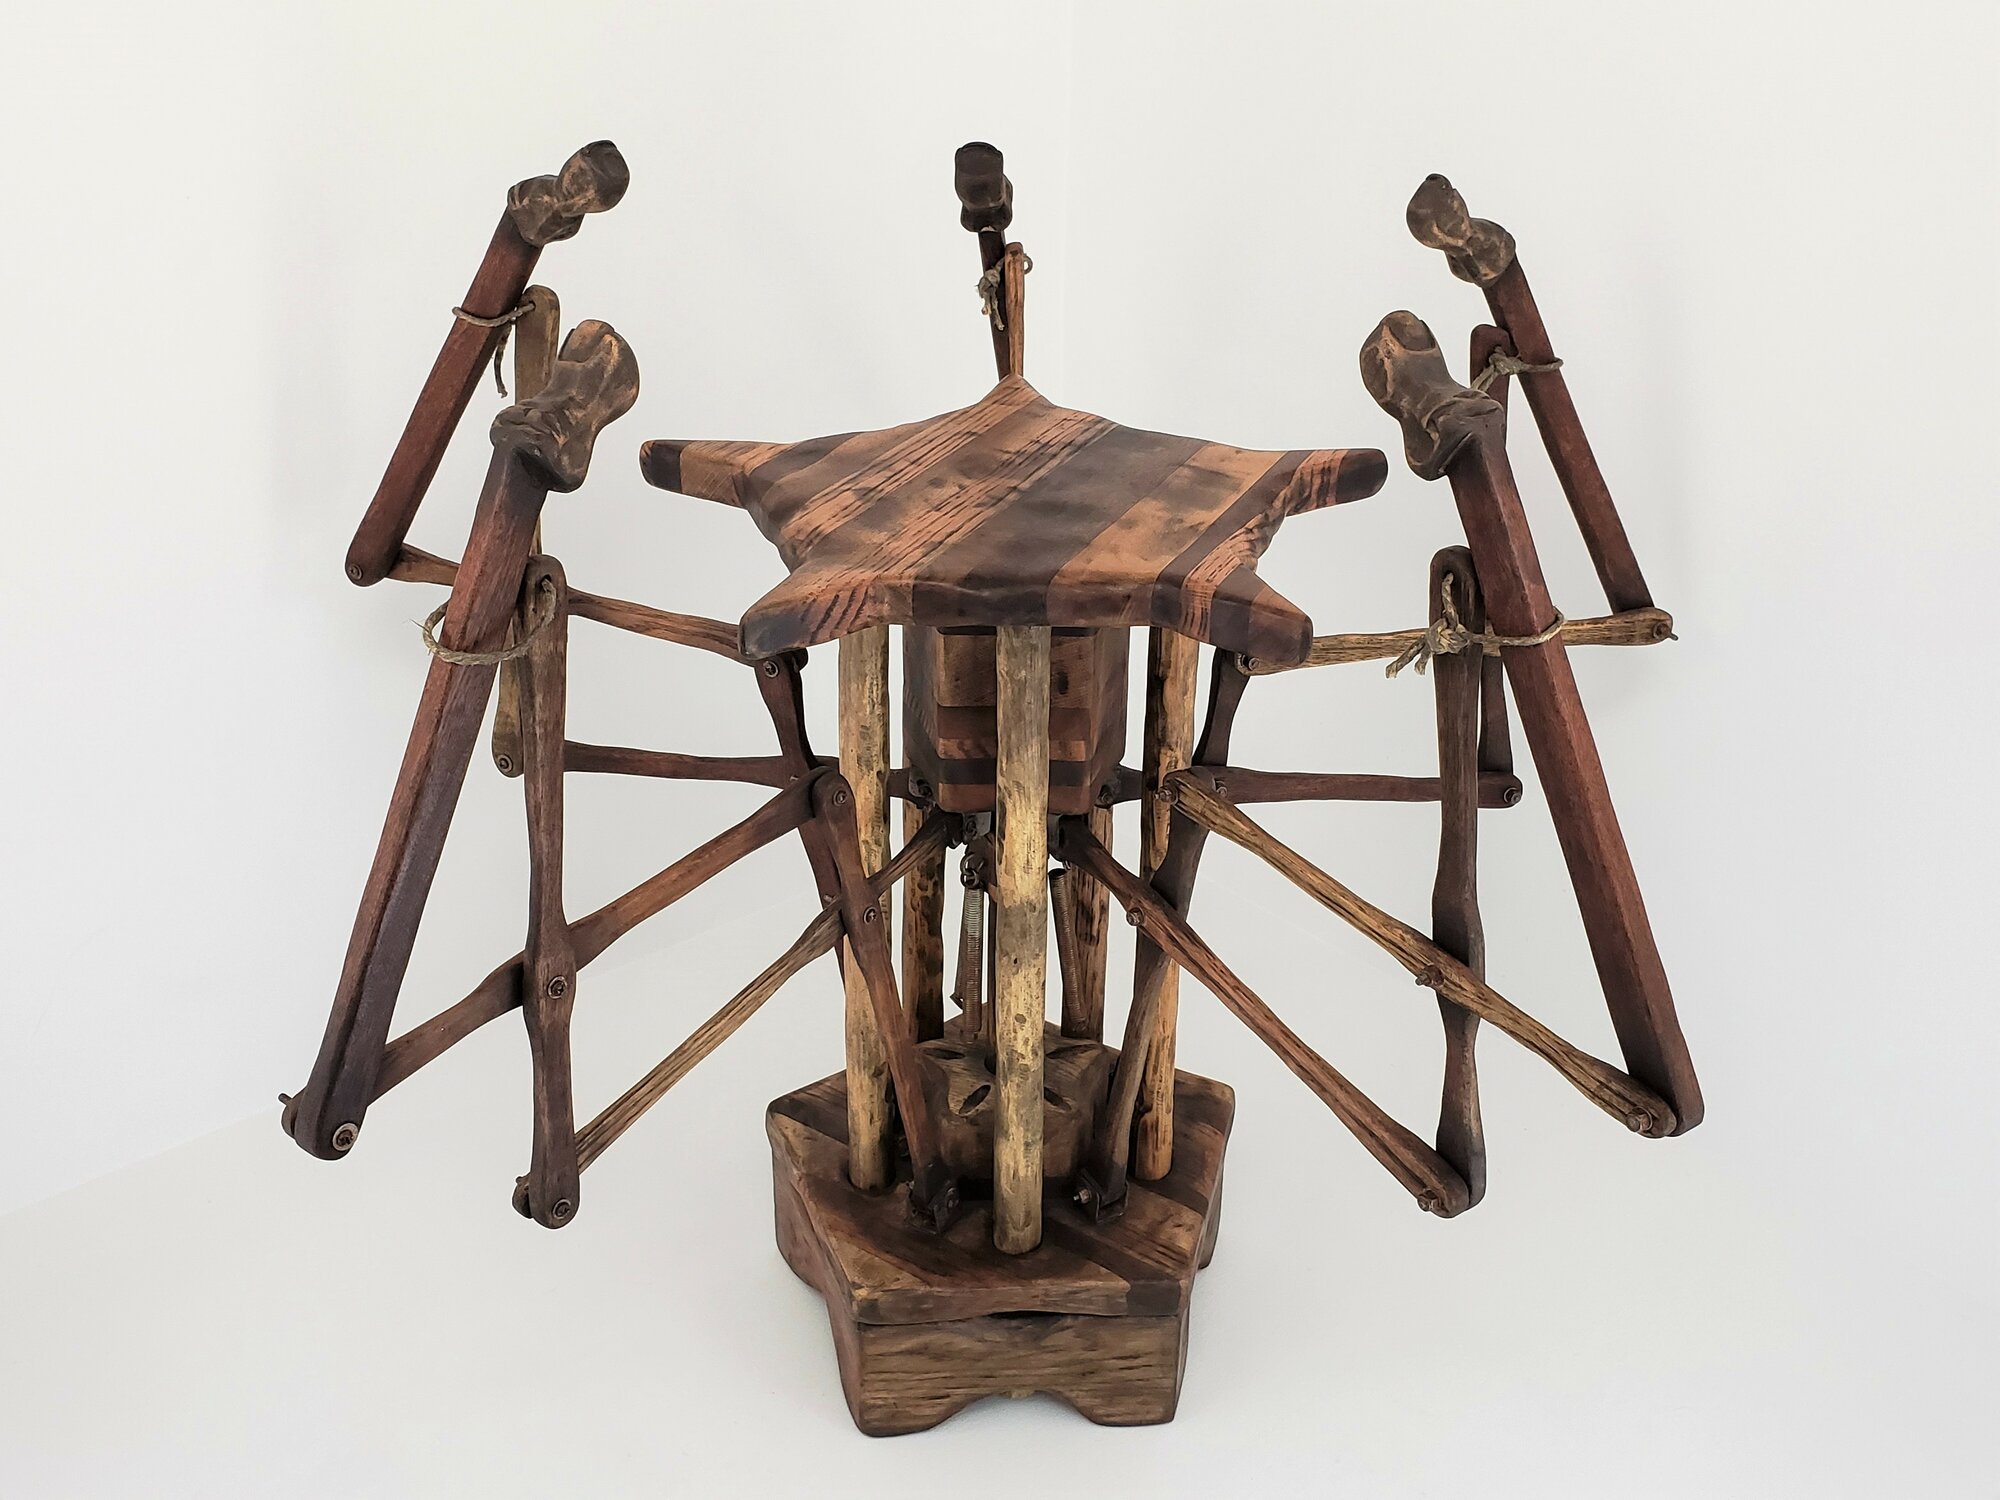 This stool points towards an occupant when the weight of a person rests on the seat. The five finger mechanisms extend and rise from beneath the seat when depressed. Once weight is released, springs pull the fingers down to their starting position and the